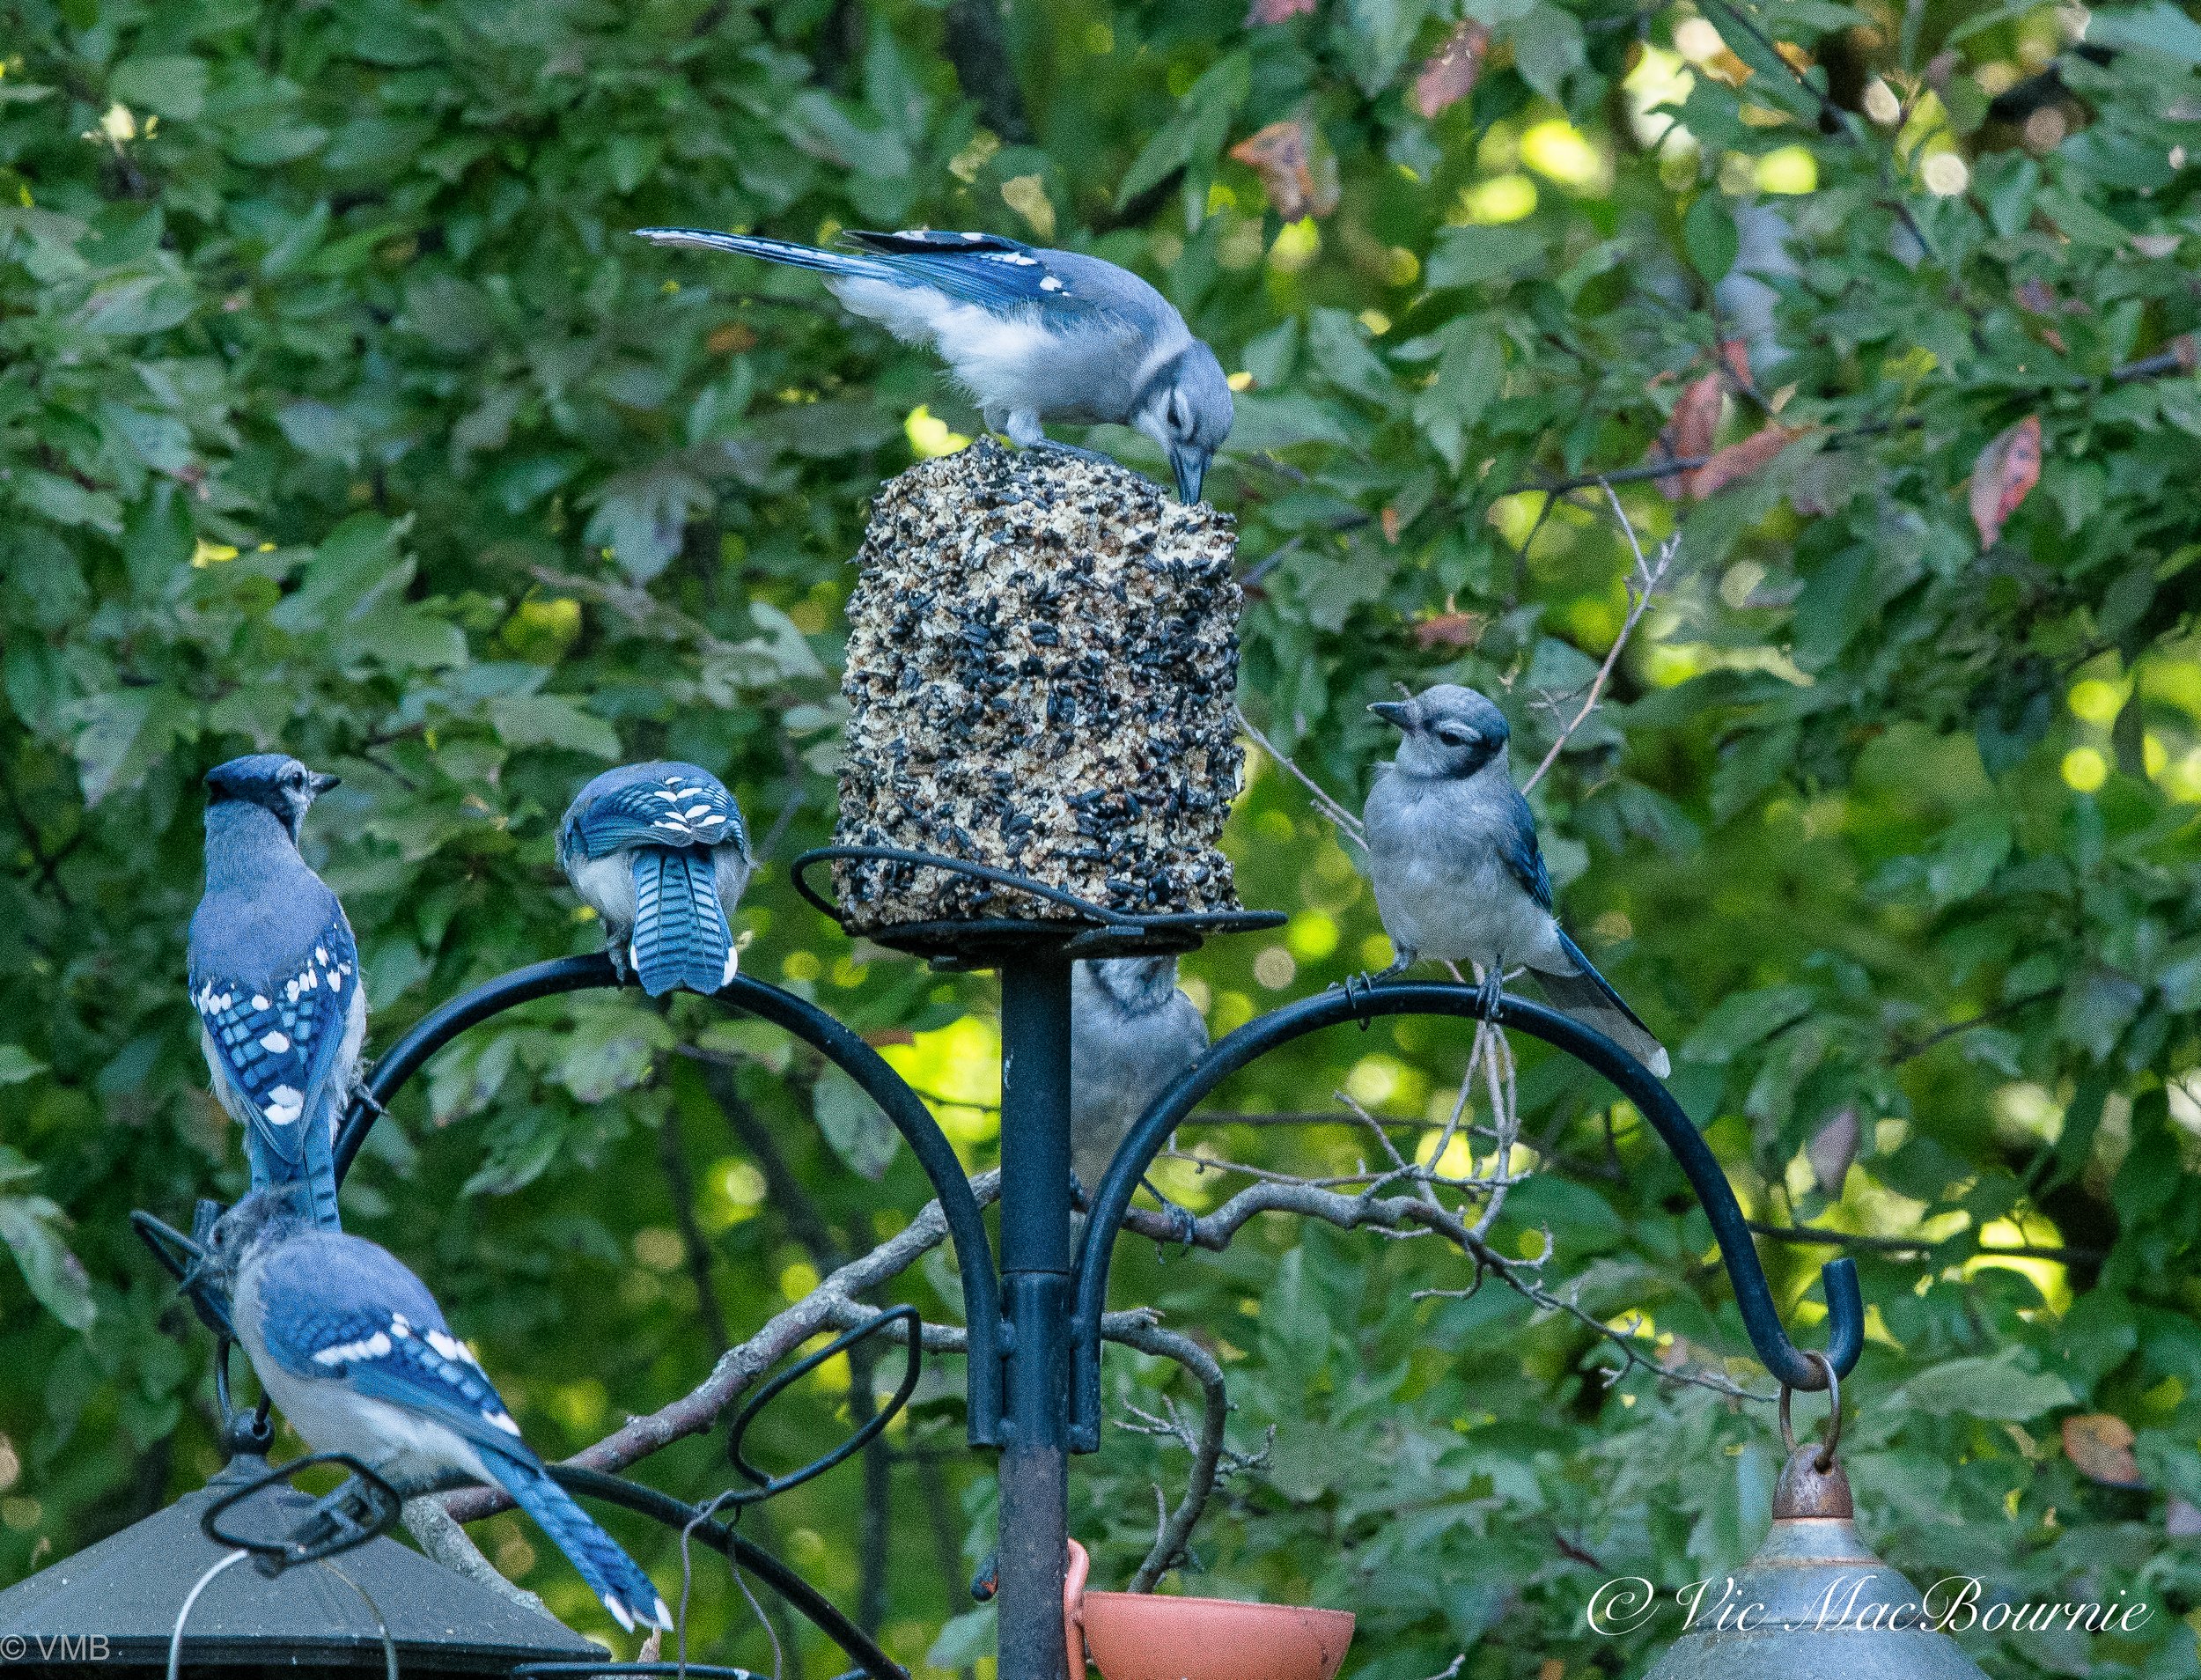 Blue jays flock to a compressed seed feeder at the backyard bird feeding station.